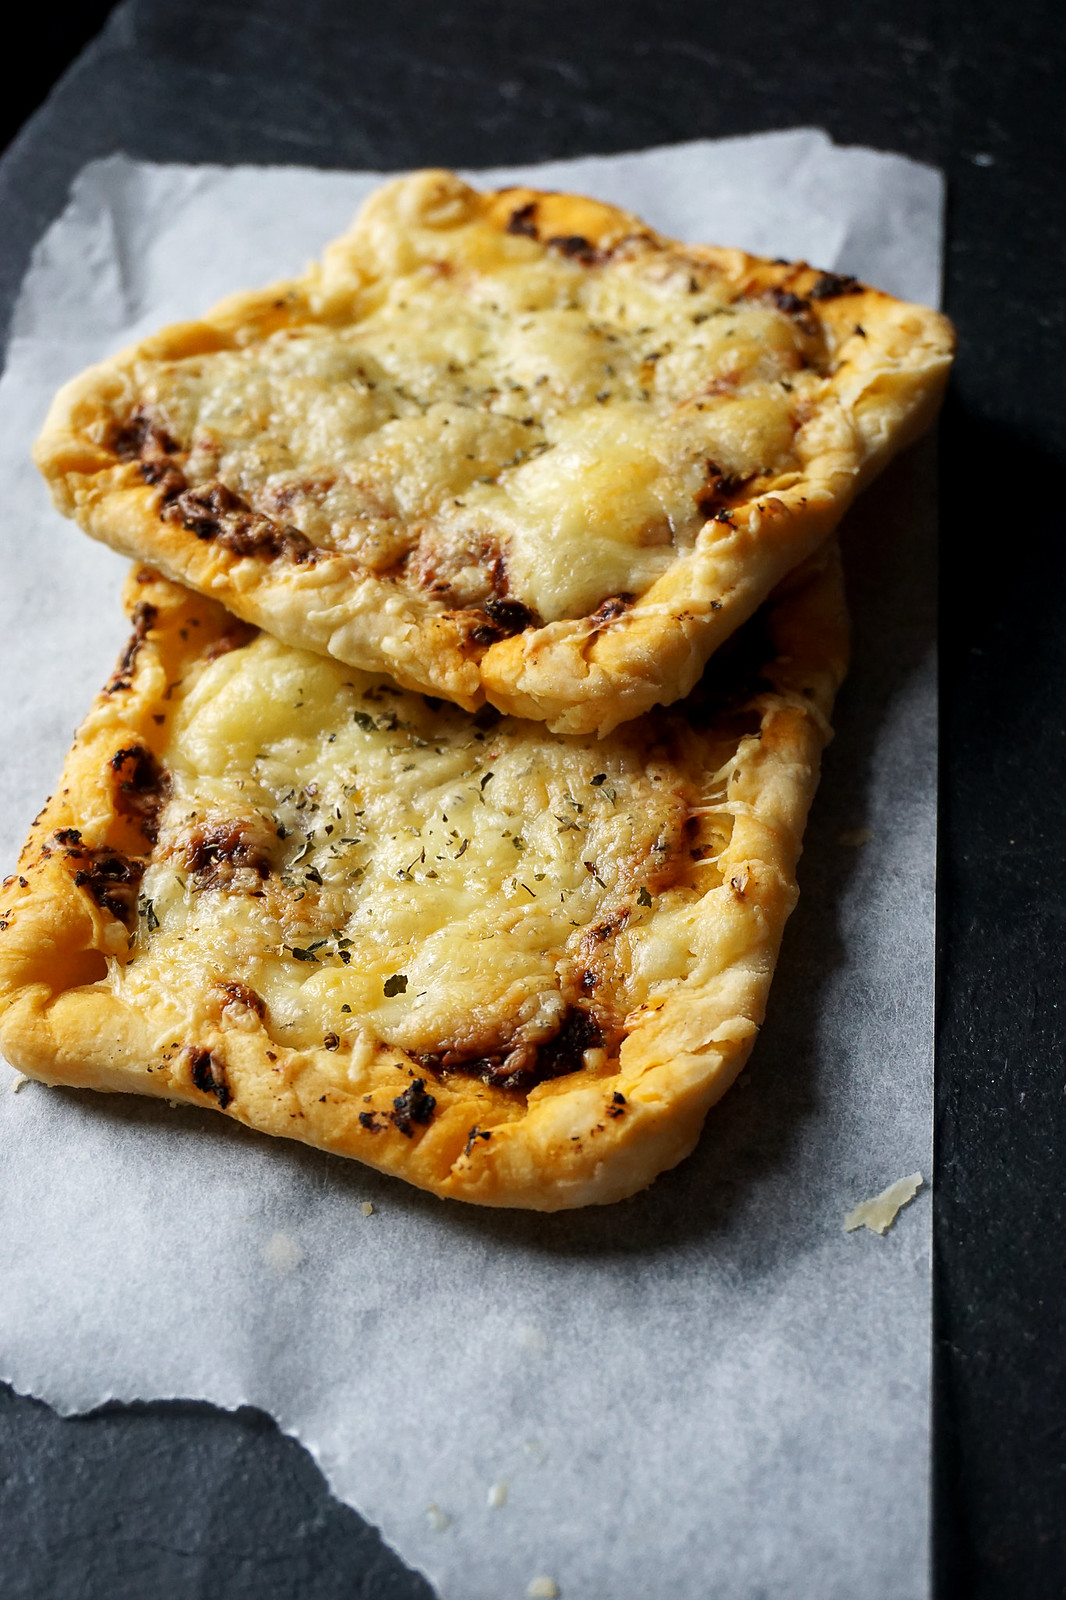 Gluten free pastry pizza slices made with Genius gluten free puff pastry